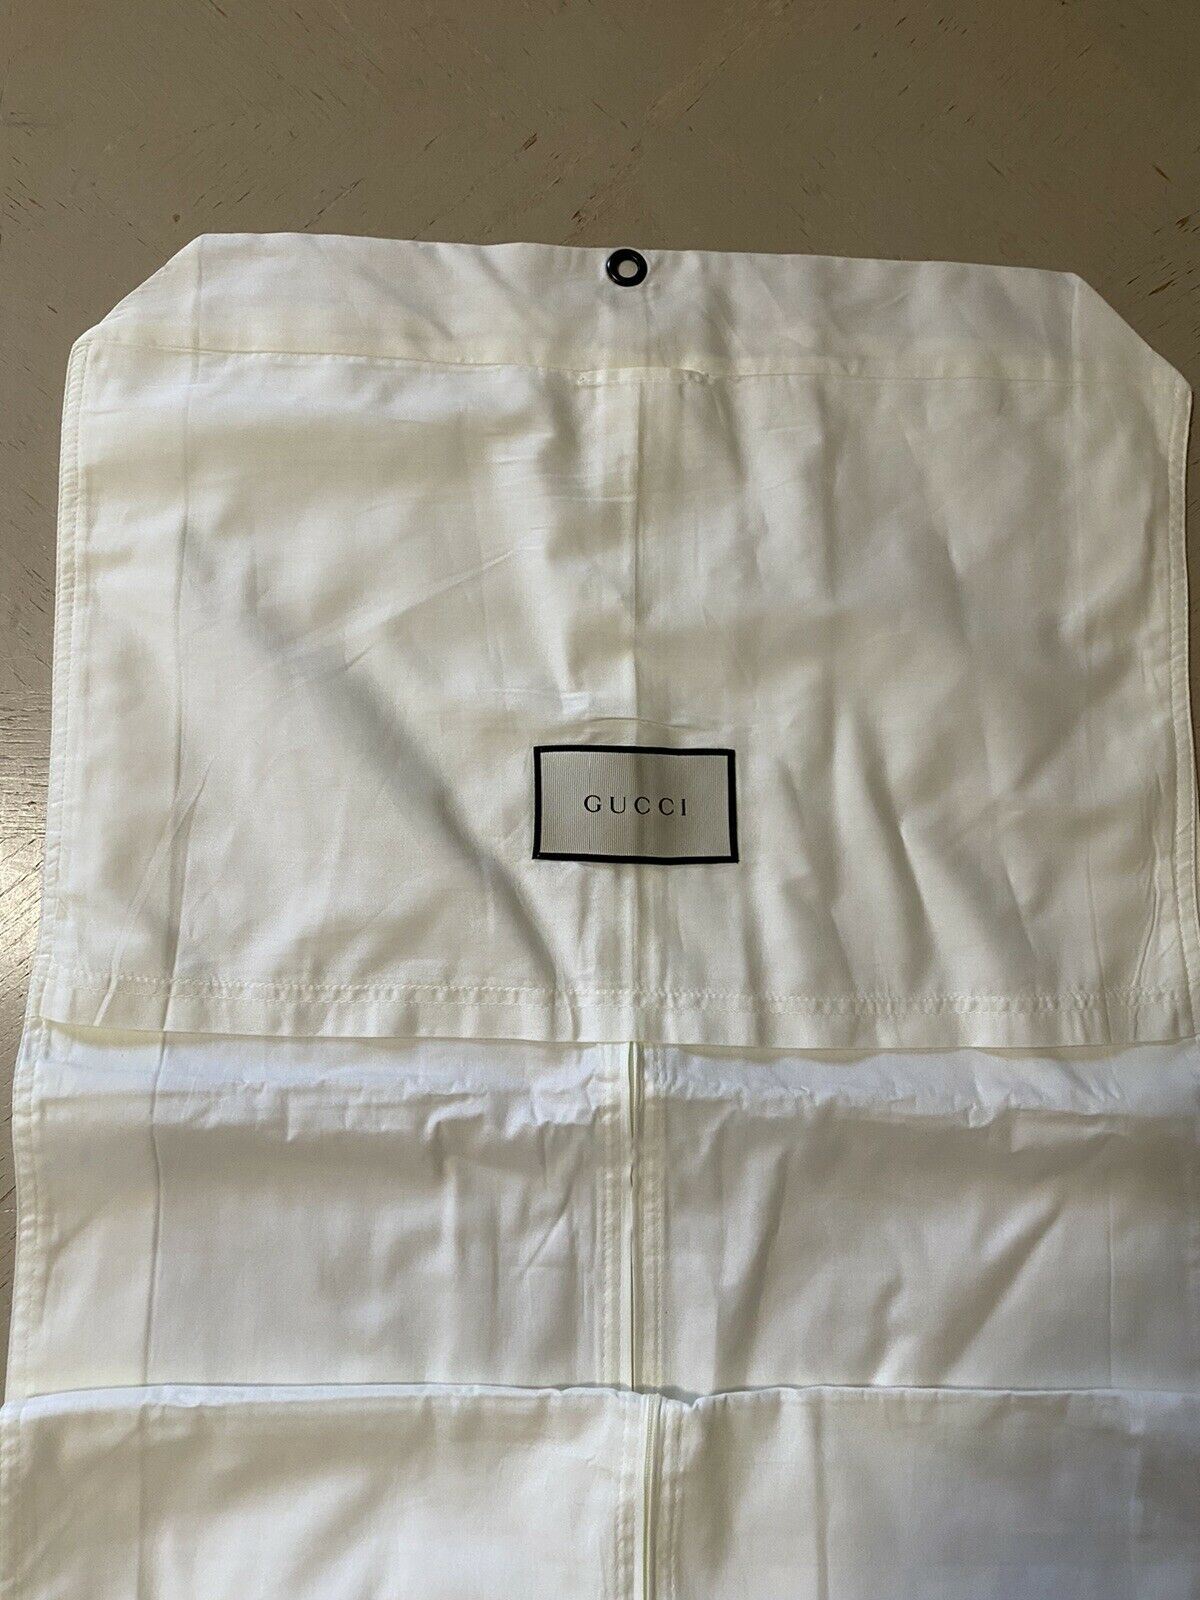 Brand New Gucci Garment Suit,  Any Clothing Unisex White  Bag